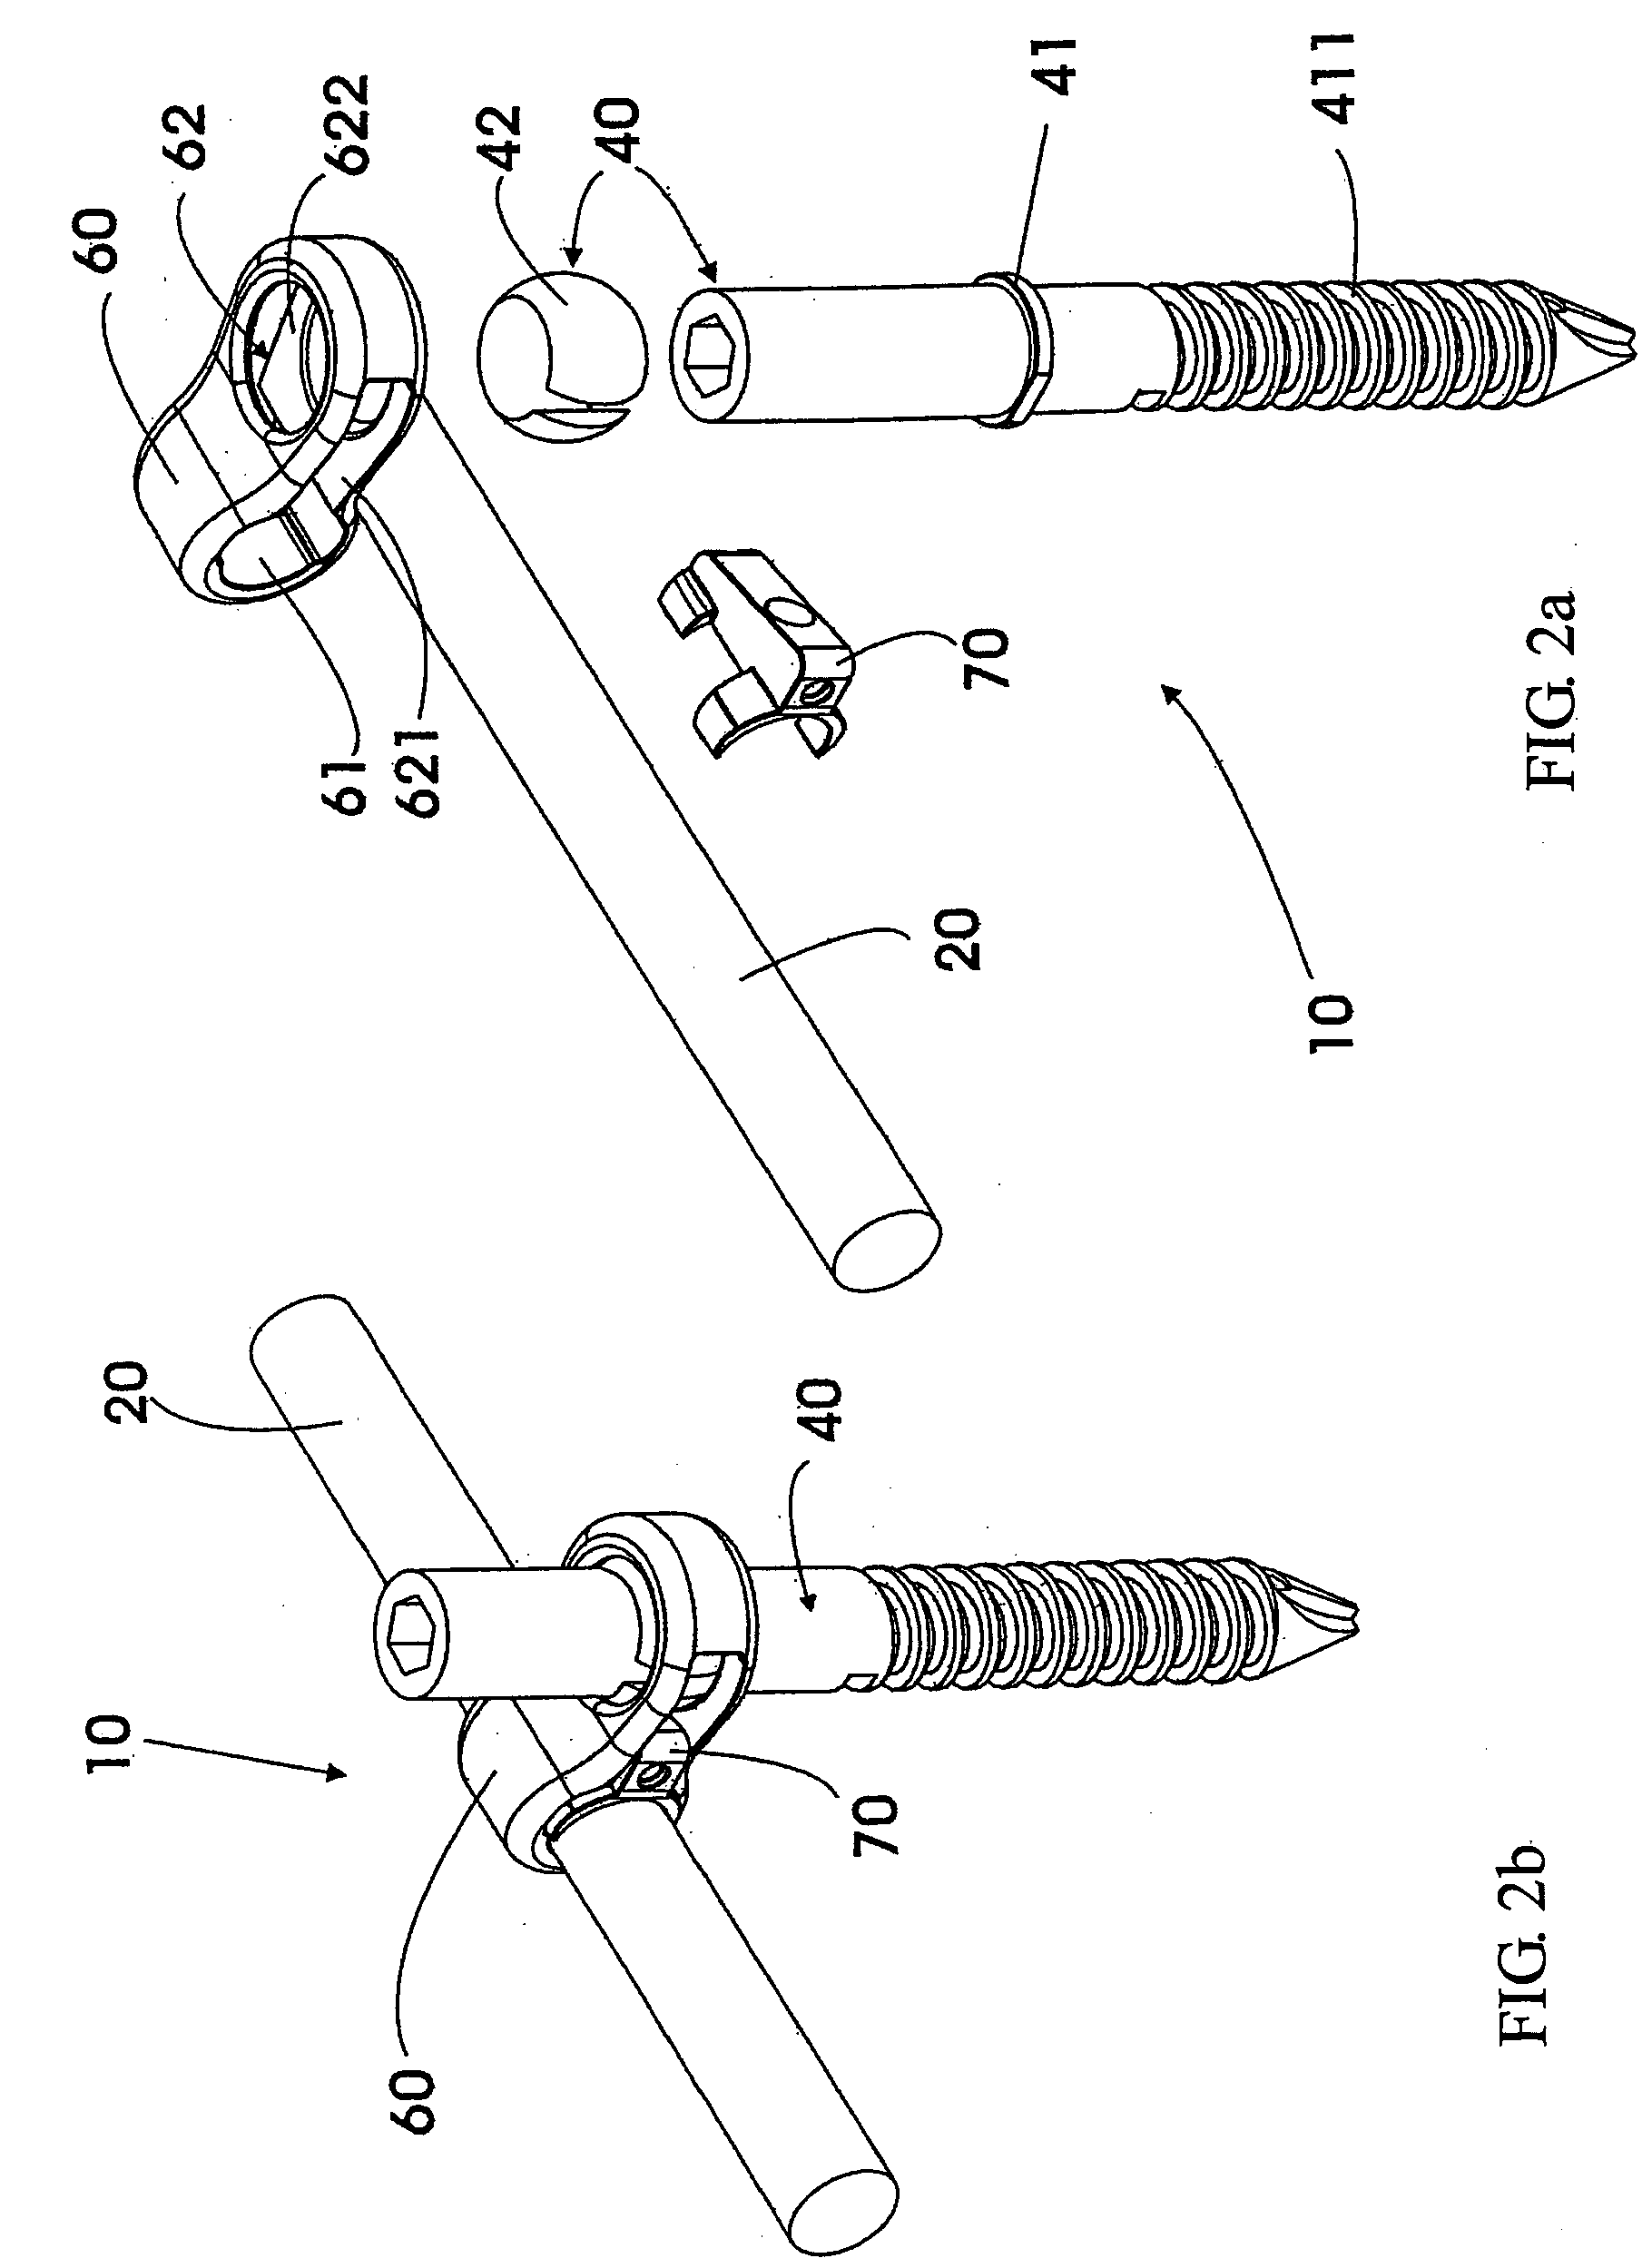 Plug-type device for retrieving spinal column under treatment